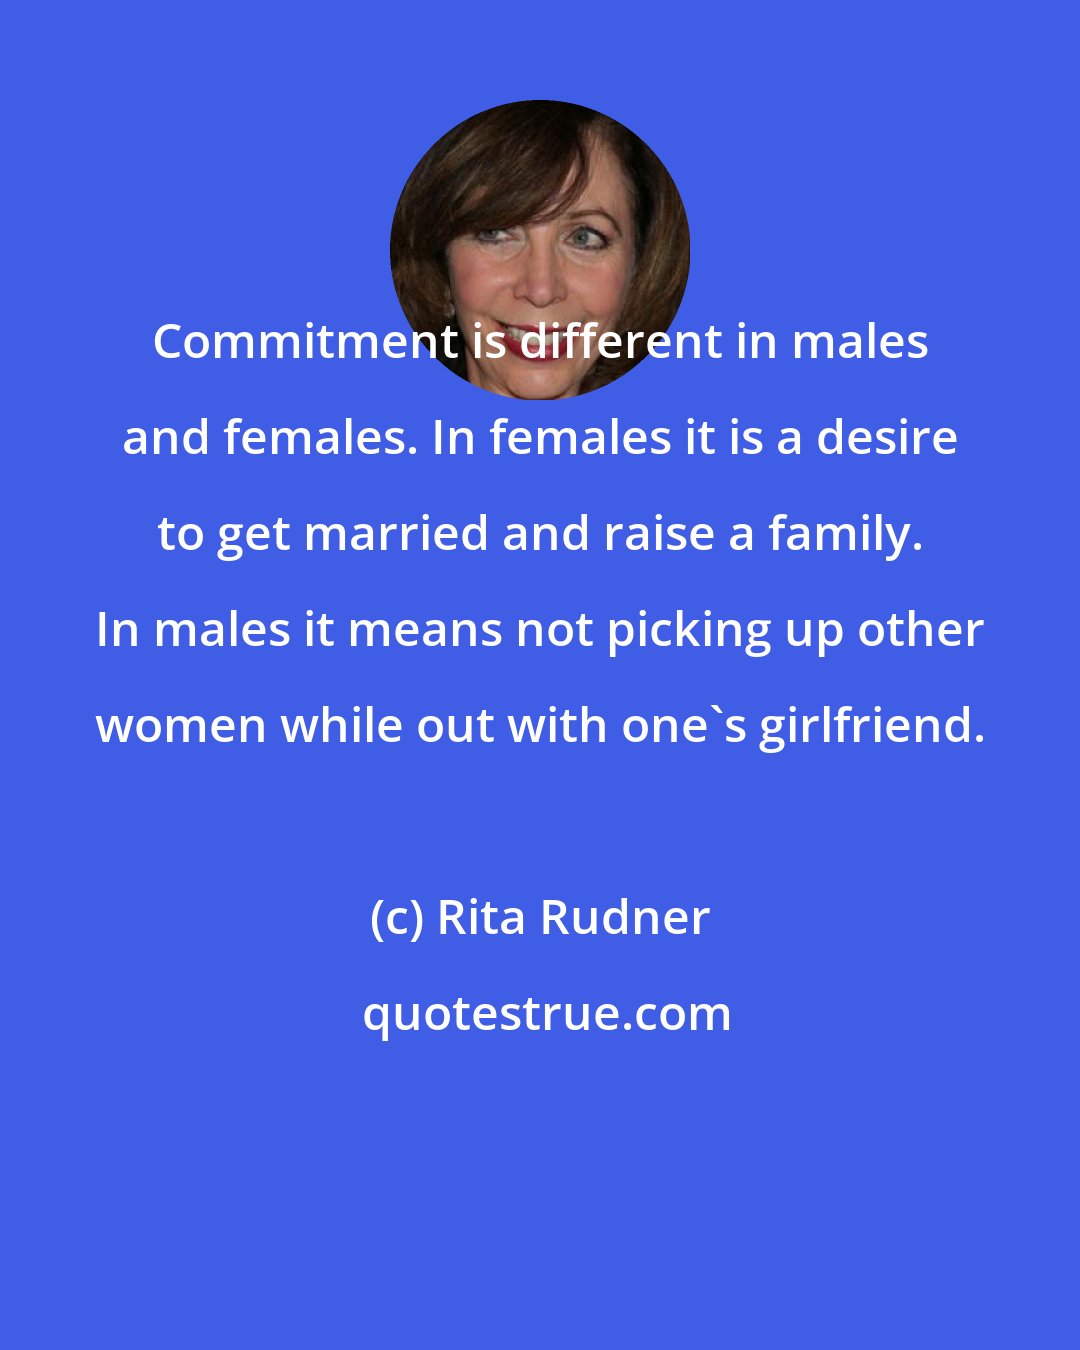 Rita Rudner: Commitment is different in males and females. In females it is a desire to get married and raise a family. In males it means not picking up other women while out with one's girlfriend.